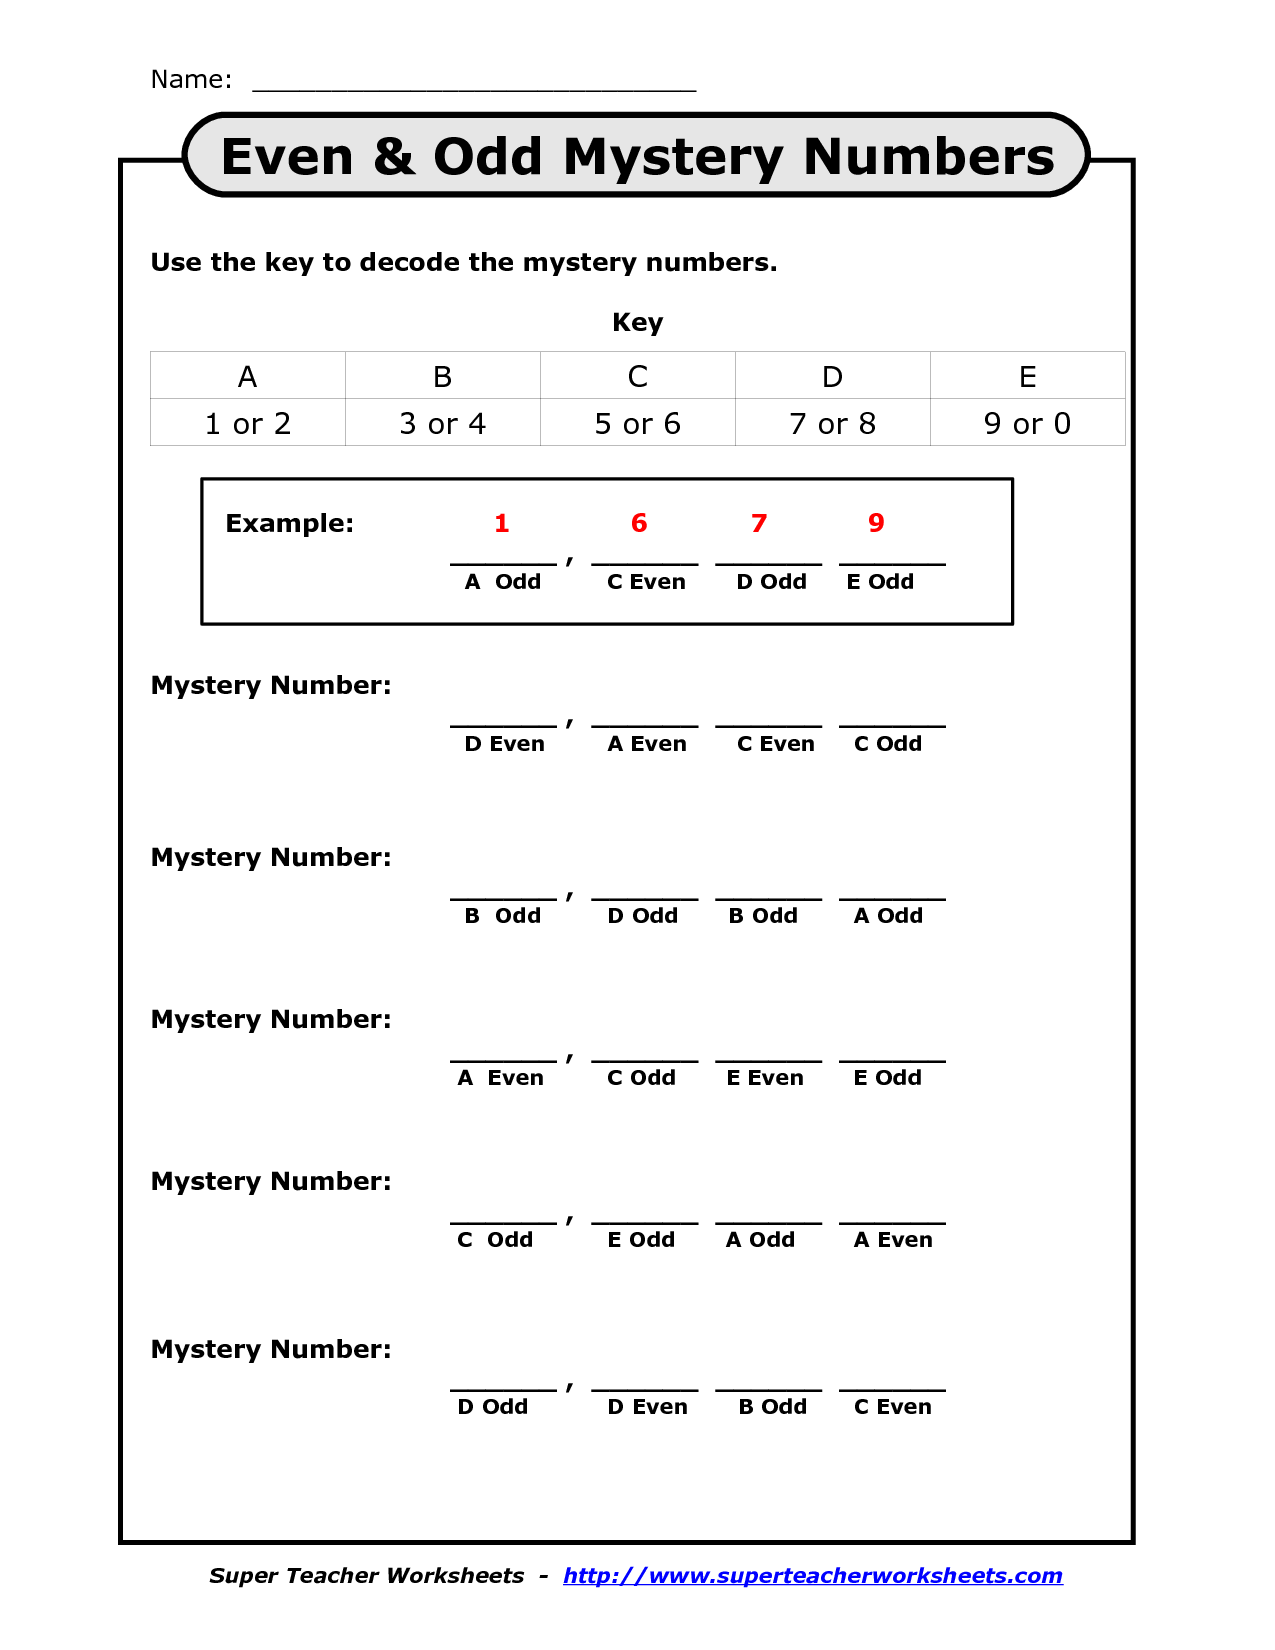 find-the-mystery-number-worksheet